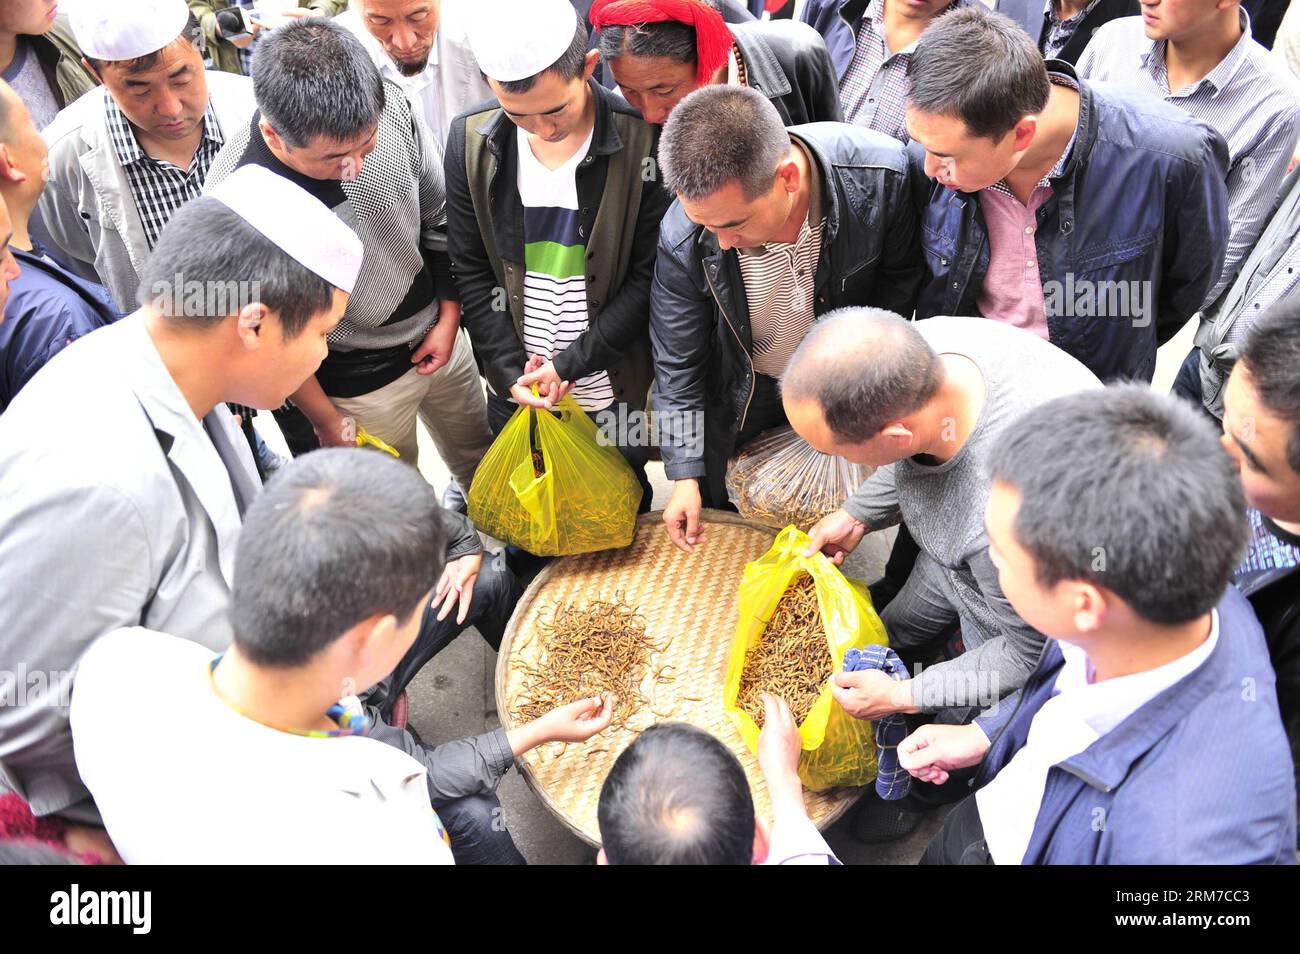 (140225) -- LHASA, Feb. 25, 2014 (Xinhua) -- Customers purchase caterpillar fungi, also called winter worm summer herb, at a caterpillar fungus market in Lhasa, capital of southwest China s Tibet Autonomous Region, July 17, 2013. Caterpillar fungus, a parasitic fungus that sprouts from the corpses of ghost moth larva, can sell for about 10 US dollars for a 1-centimeter-diameter piece. In 2013, the yield of caterpillar fungi in Tibet increased by 50 percent year on year to 53,700.65 kilograms, according to the local Agriculture and Pastoral Office. (Xinhua/Liu Kun) (lfj) CHINA-LHASA-CATERPILLAR Stock Photo